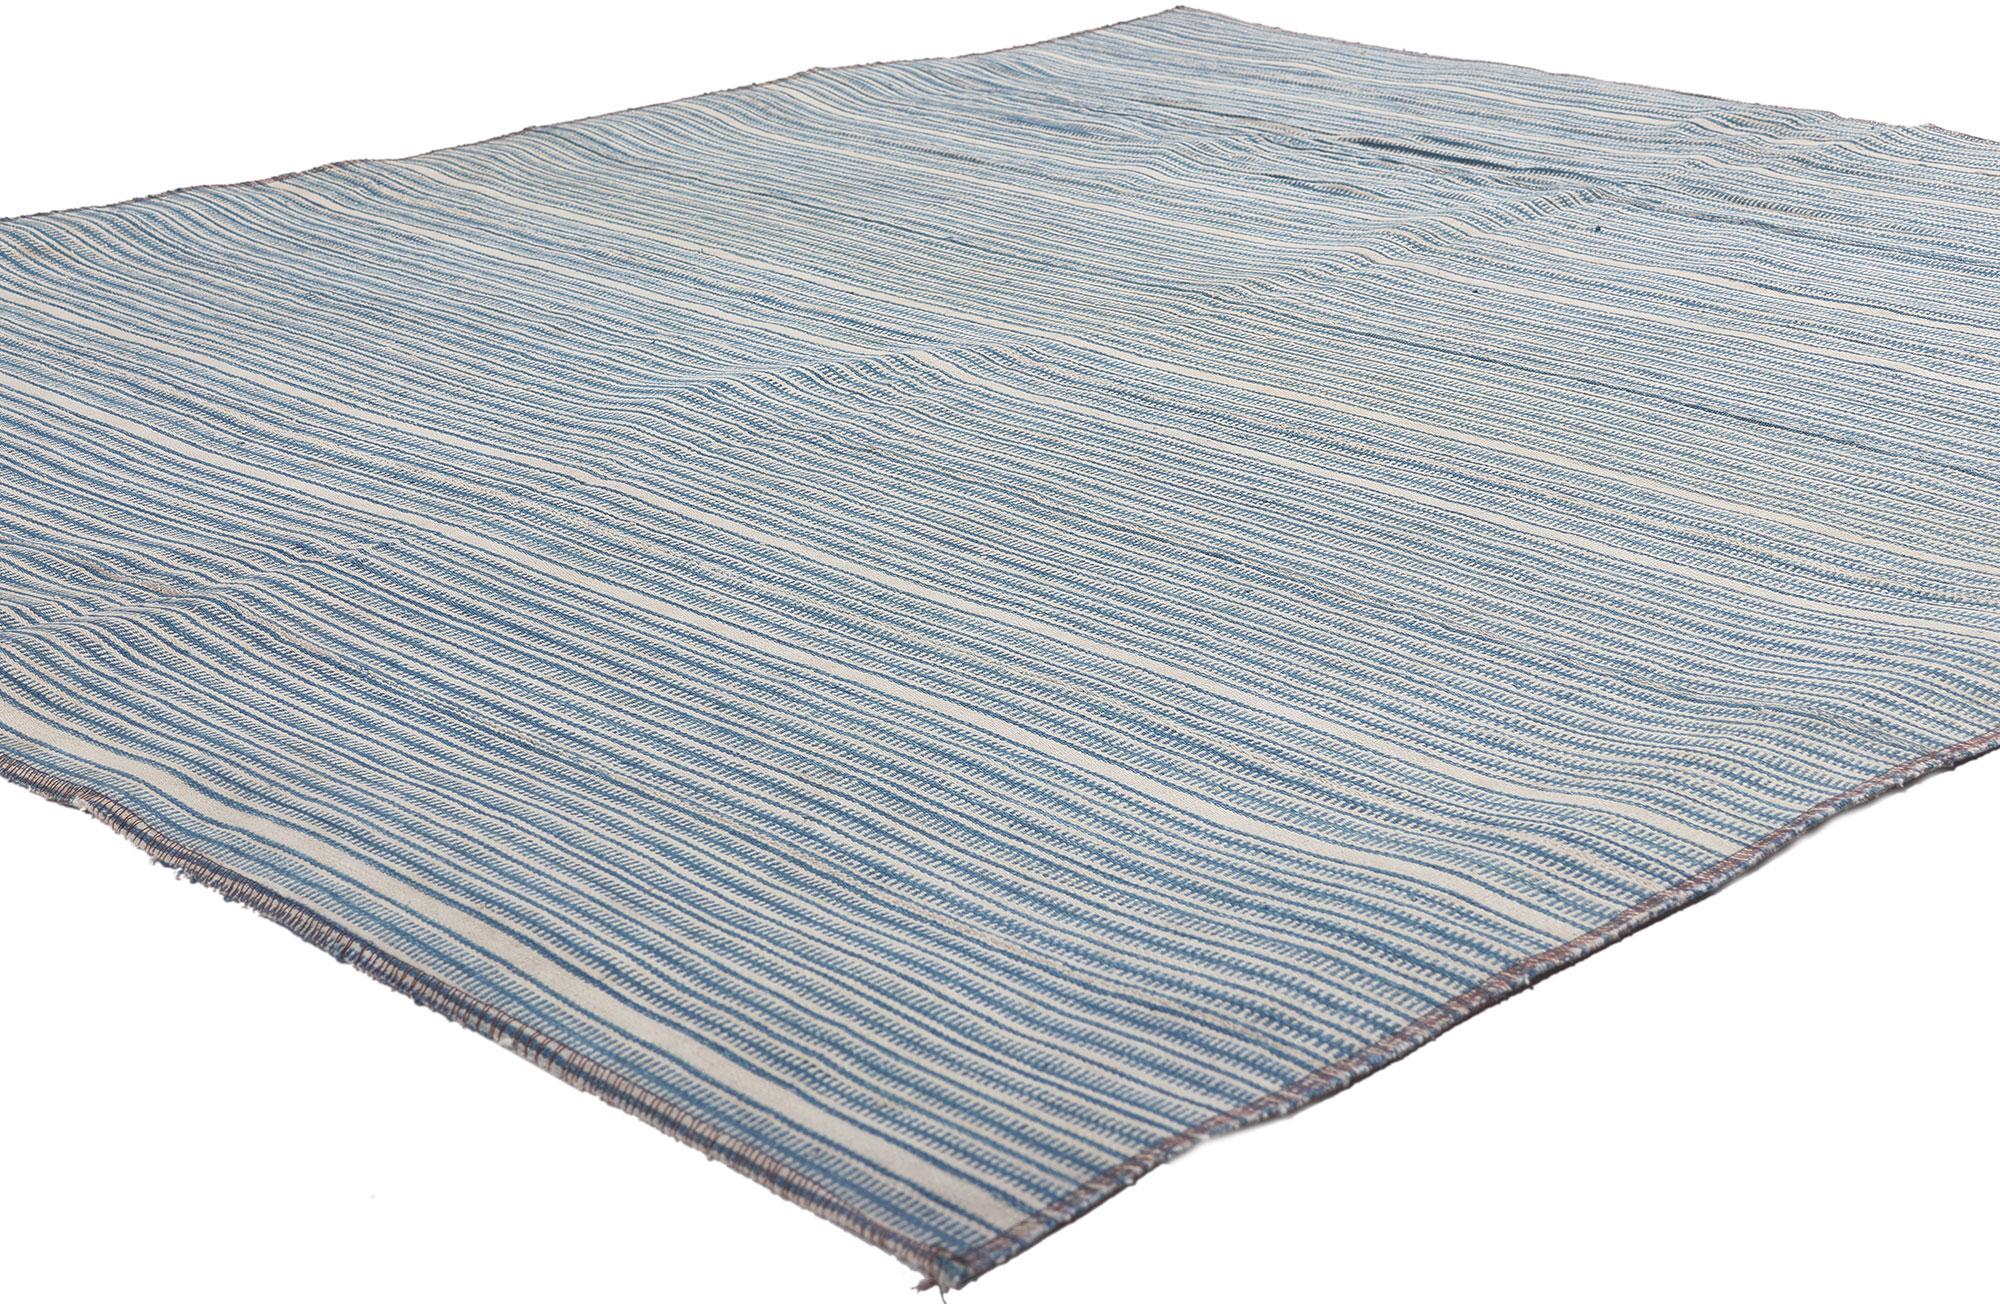 60813 Vintage Turkish Striped Kilim Rug with 05’00 x 06’00.
Crisp but relaxed, this handwoven vintage Turkish striped kilim rug was designed to be quaint, in addition to being functional. The distinctive crosshatch pattern and tranquil colorway